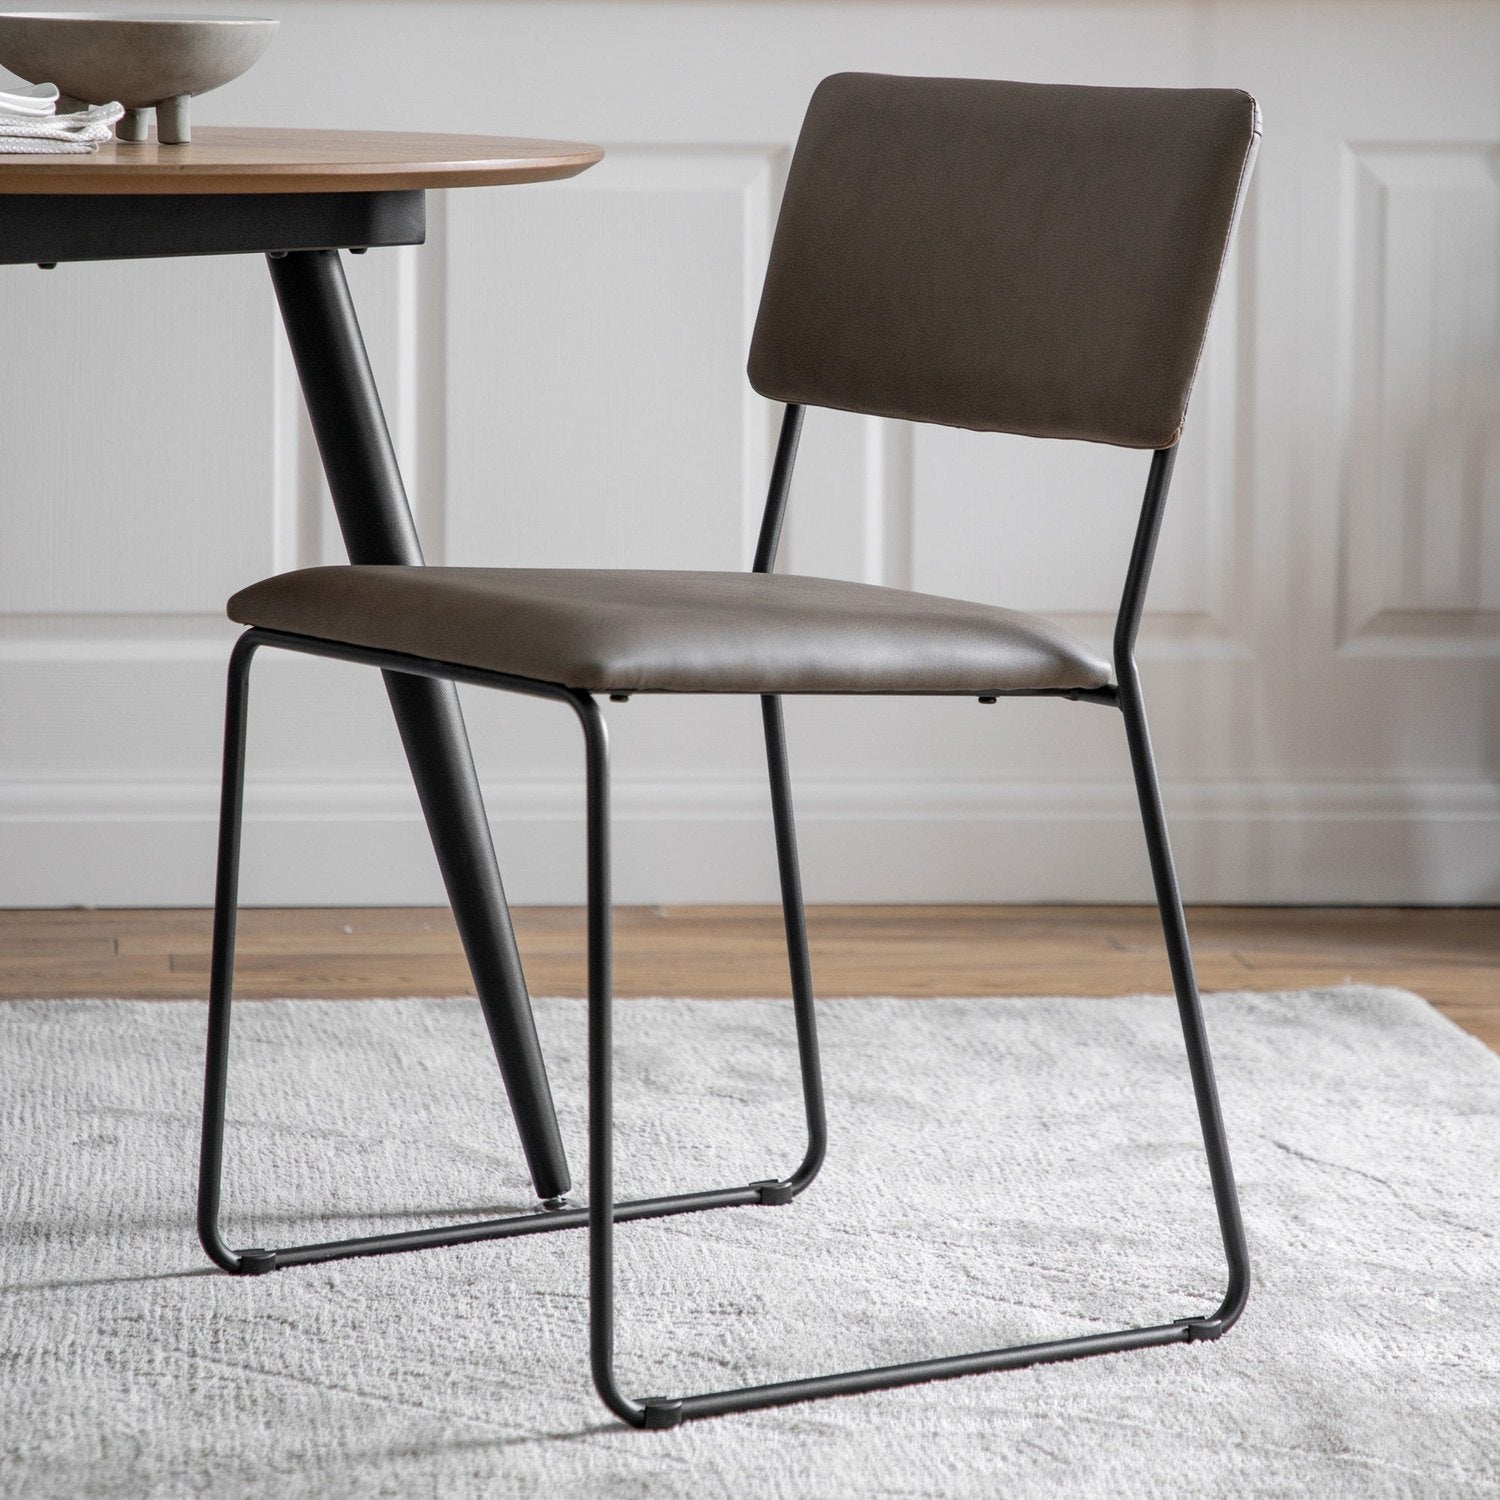 Chalkwell Dining Chairs Set of 2 - Padded Backrest & Seat - Black Metal Legs